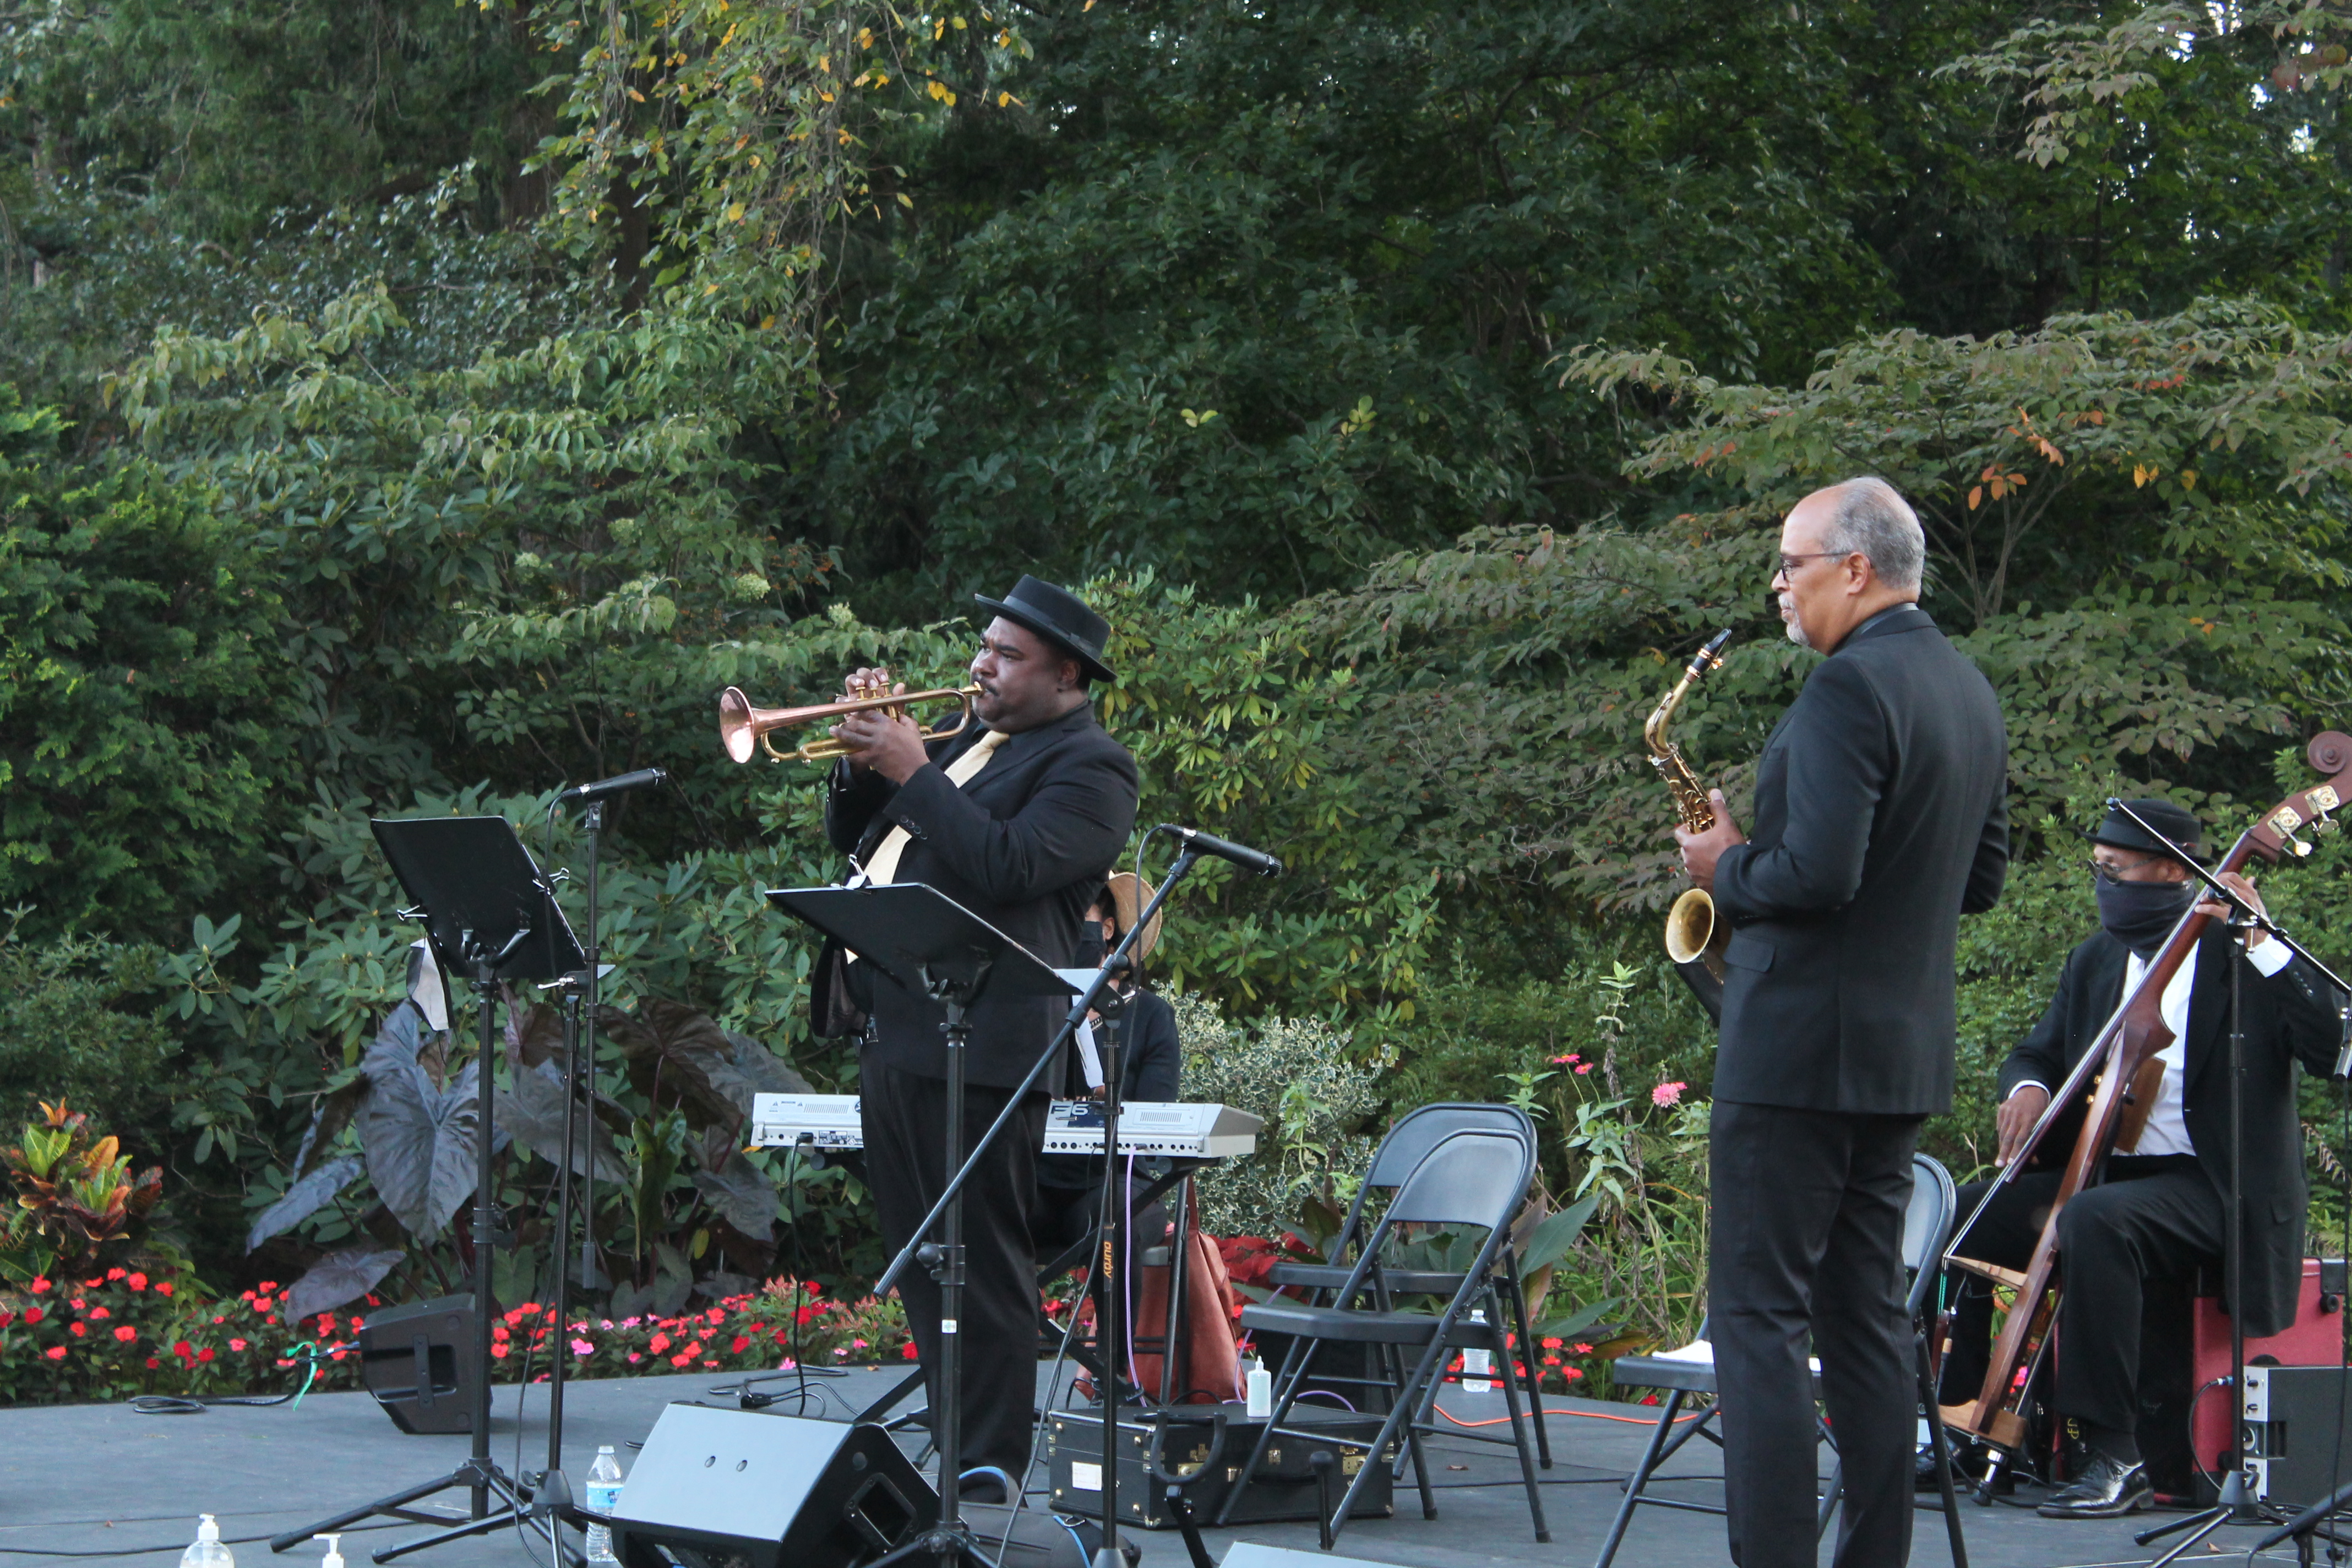 A trumpet player on stage at Jazz in the Gardens.